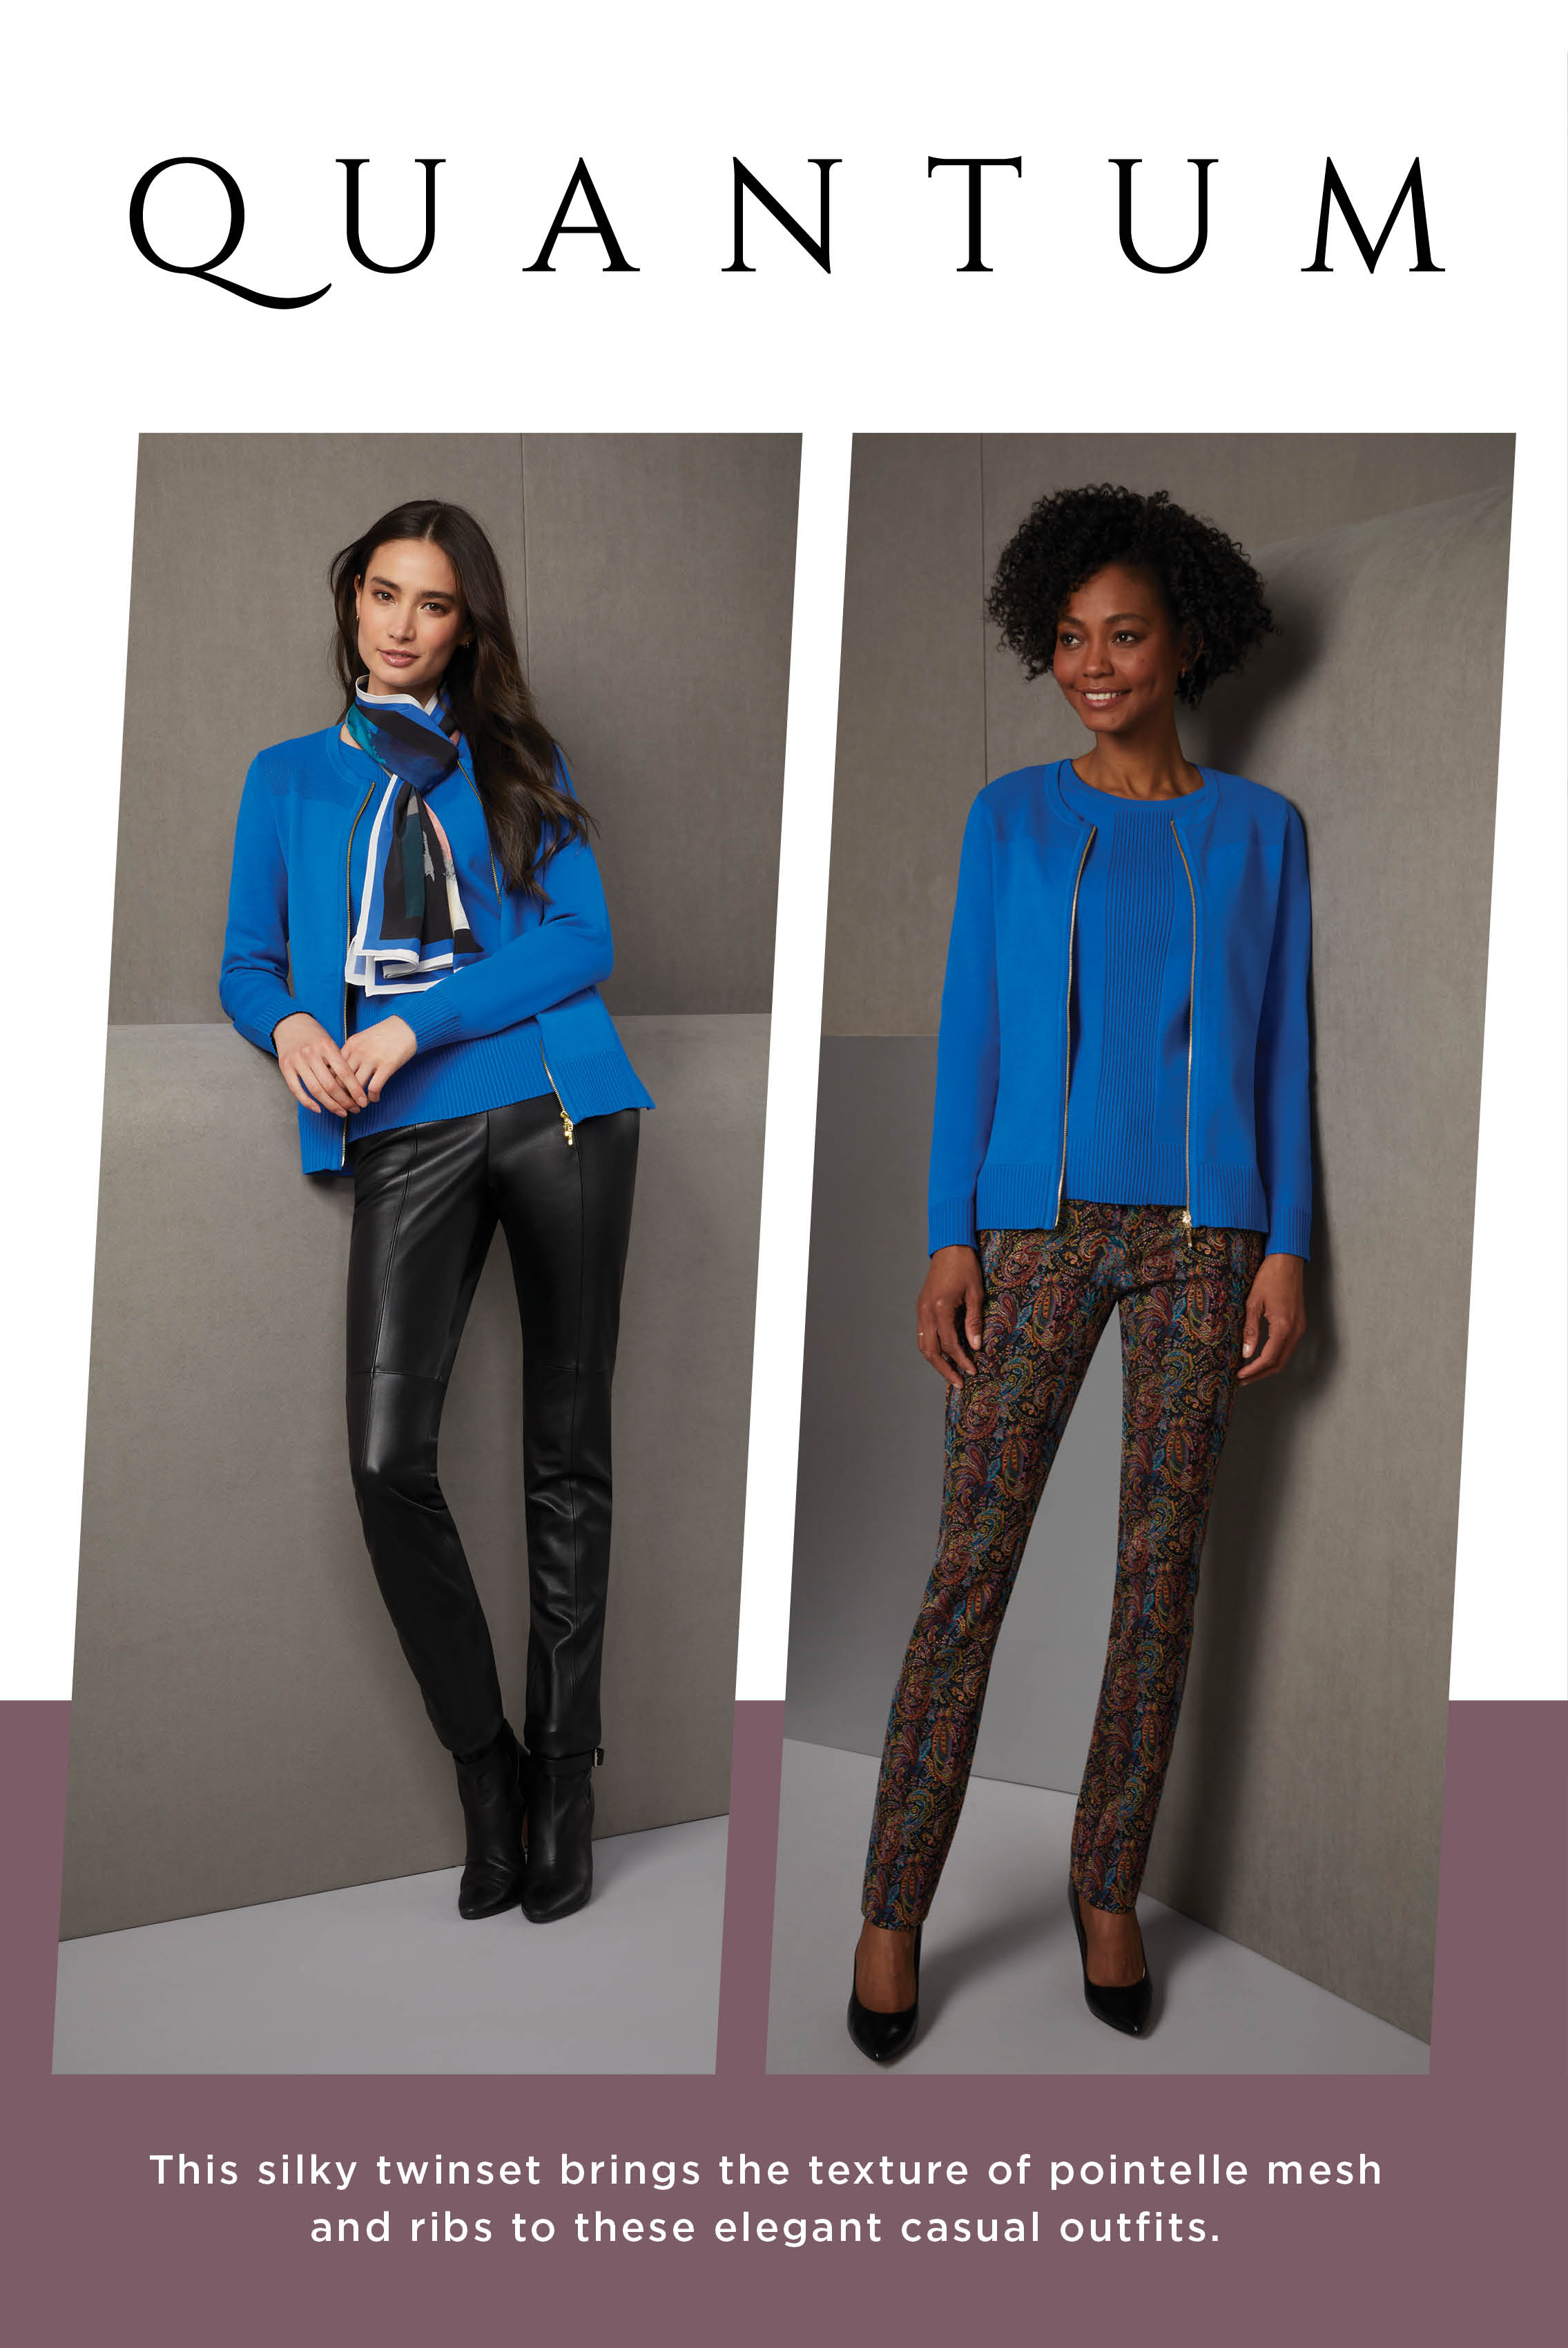 This silky twinset in electric blue brings the texture of pointelle mesh and ribs to this elegant casual outfit. The pants offer a refreshing contrast to the knit with their polished black European leather. 